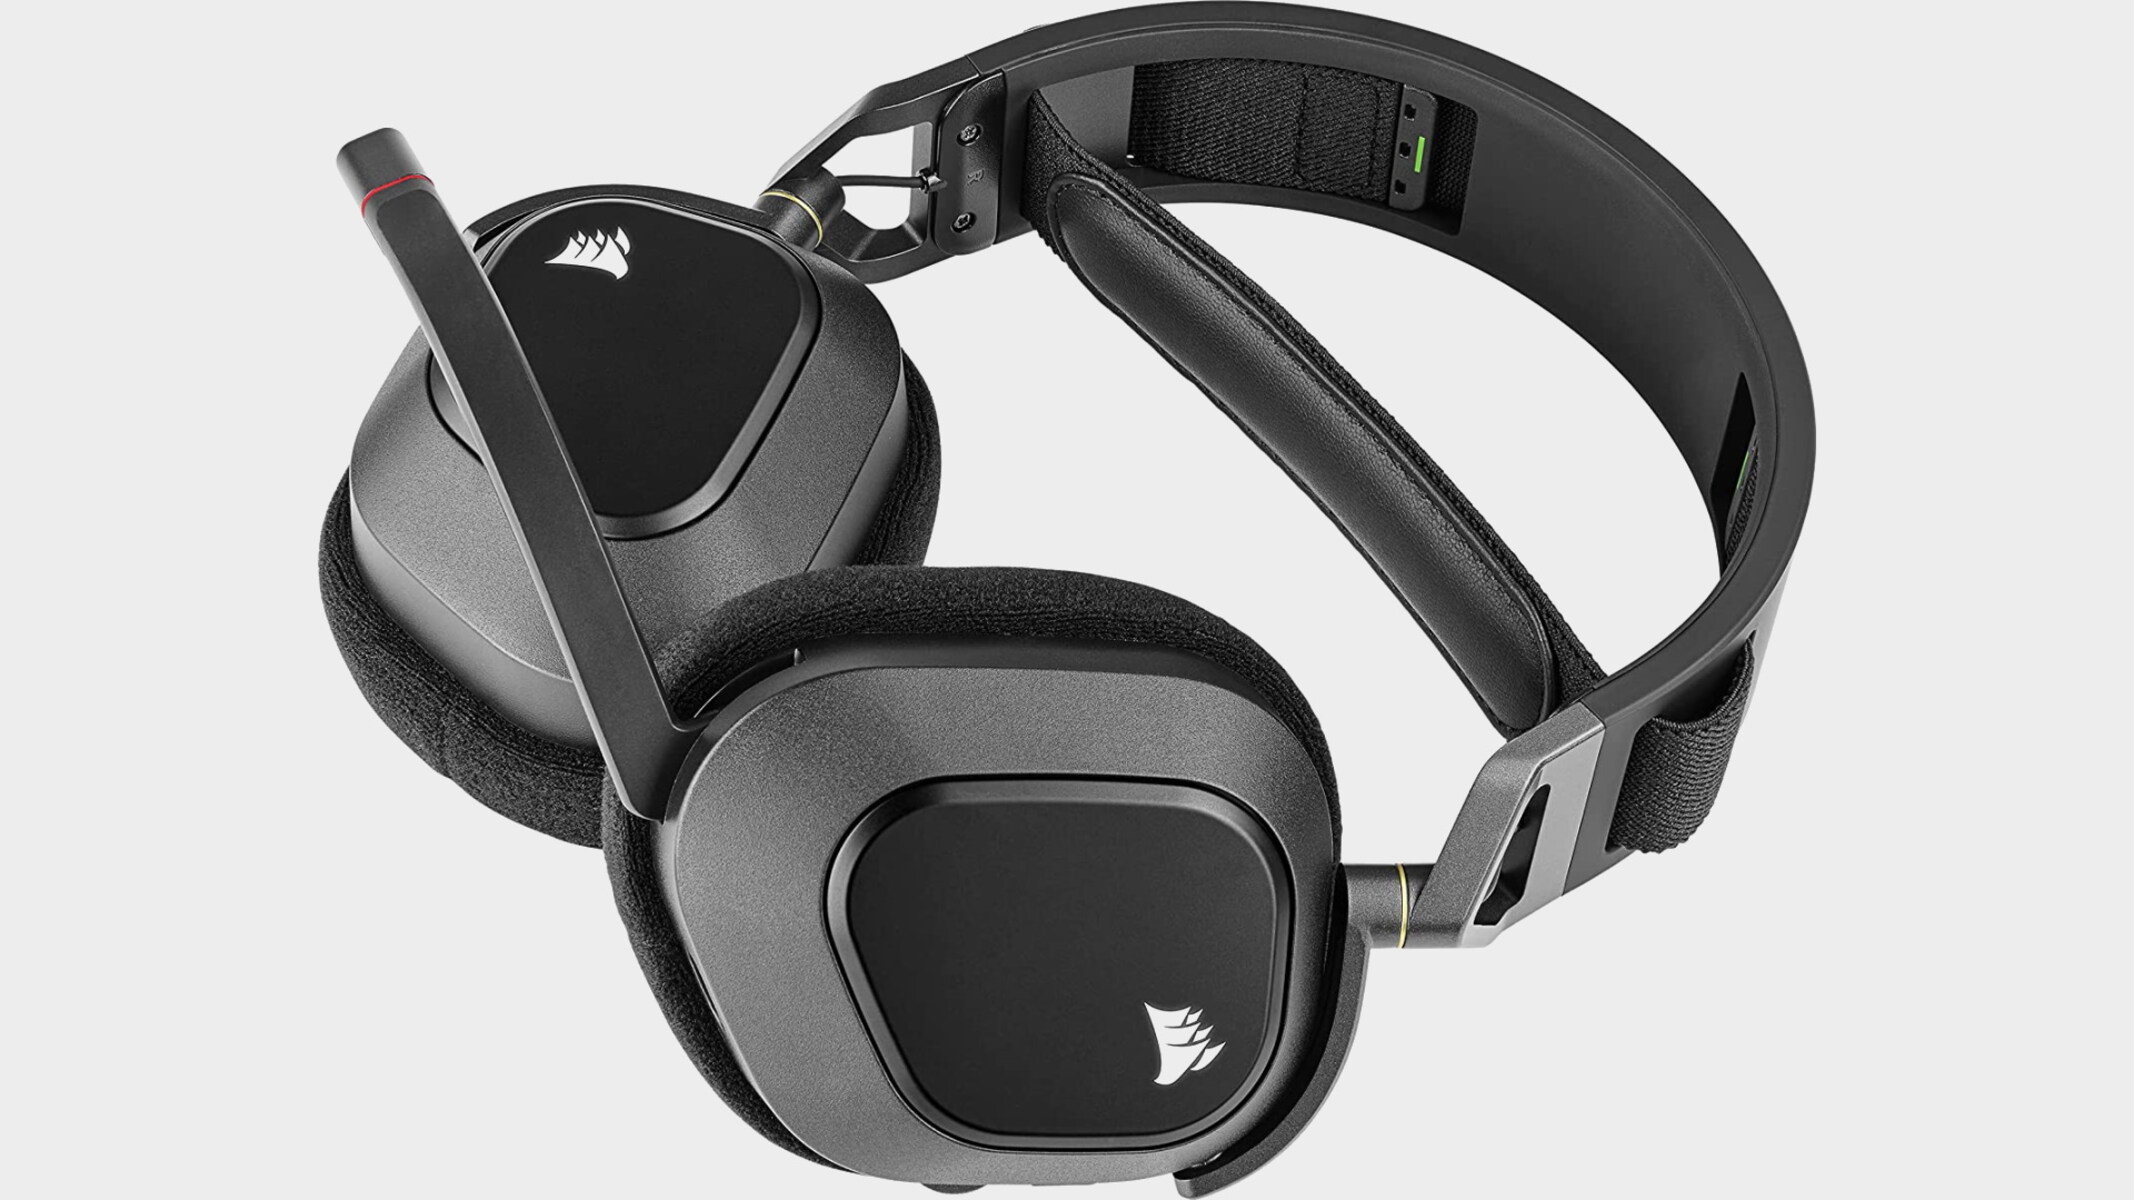 corsair-gaming-headset-how-to-direct-sound-to-headset-instead-of-speakers